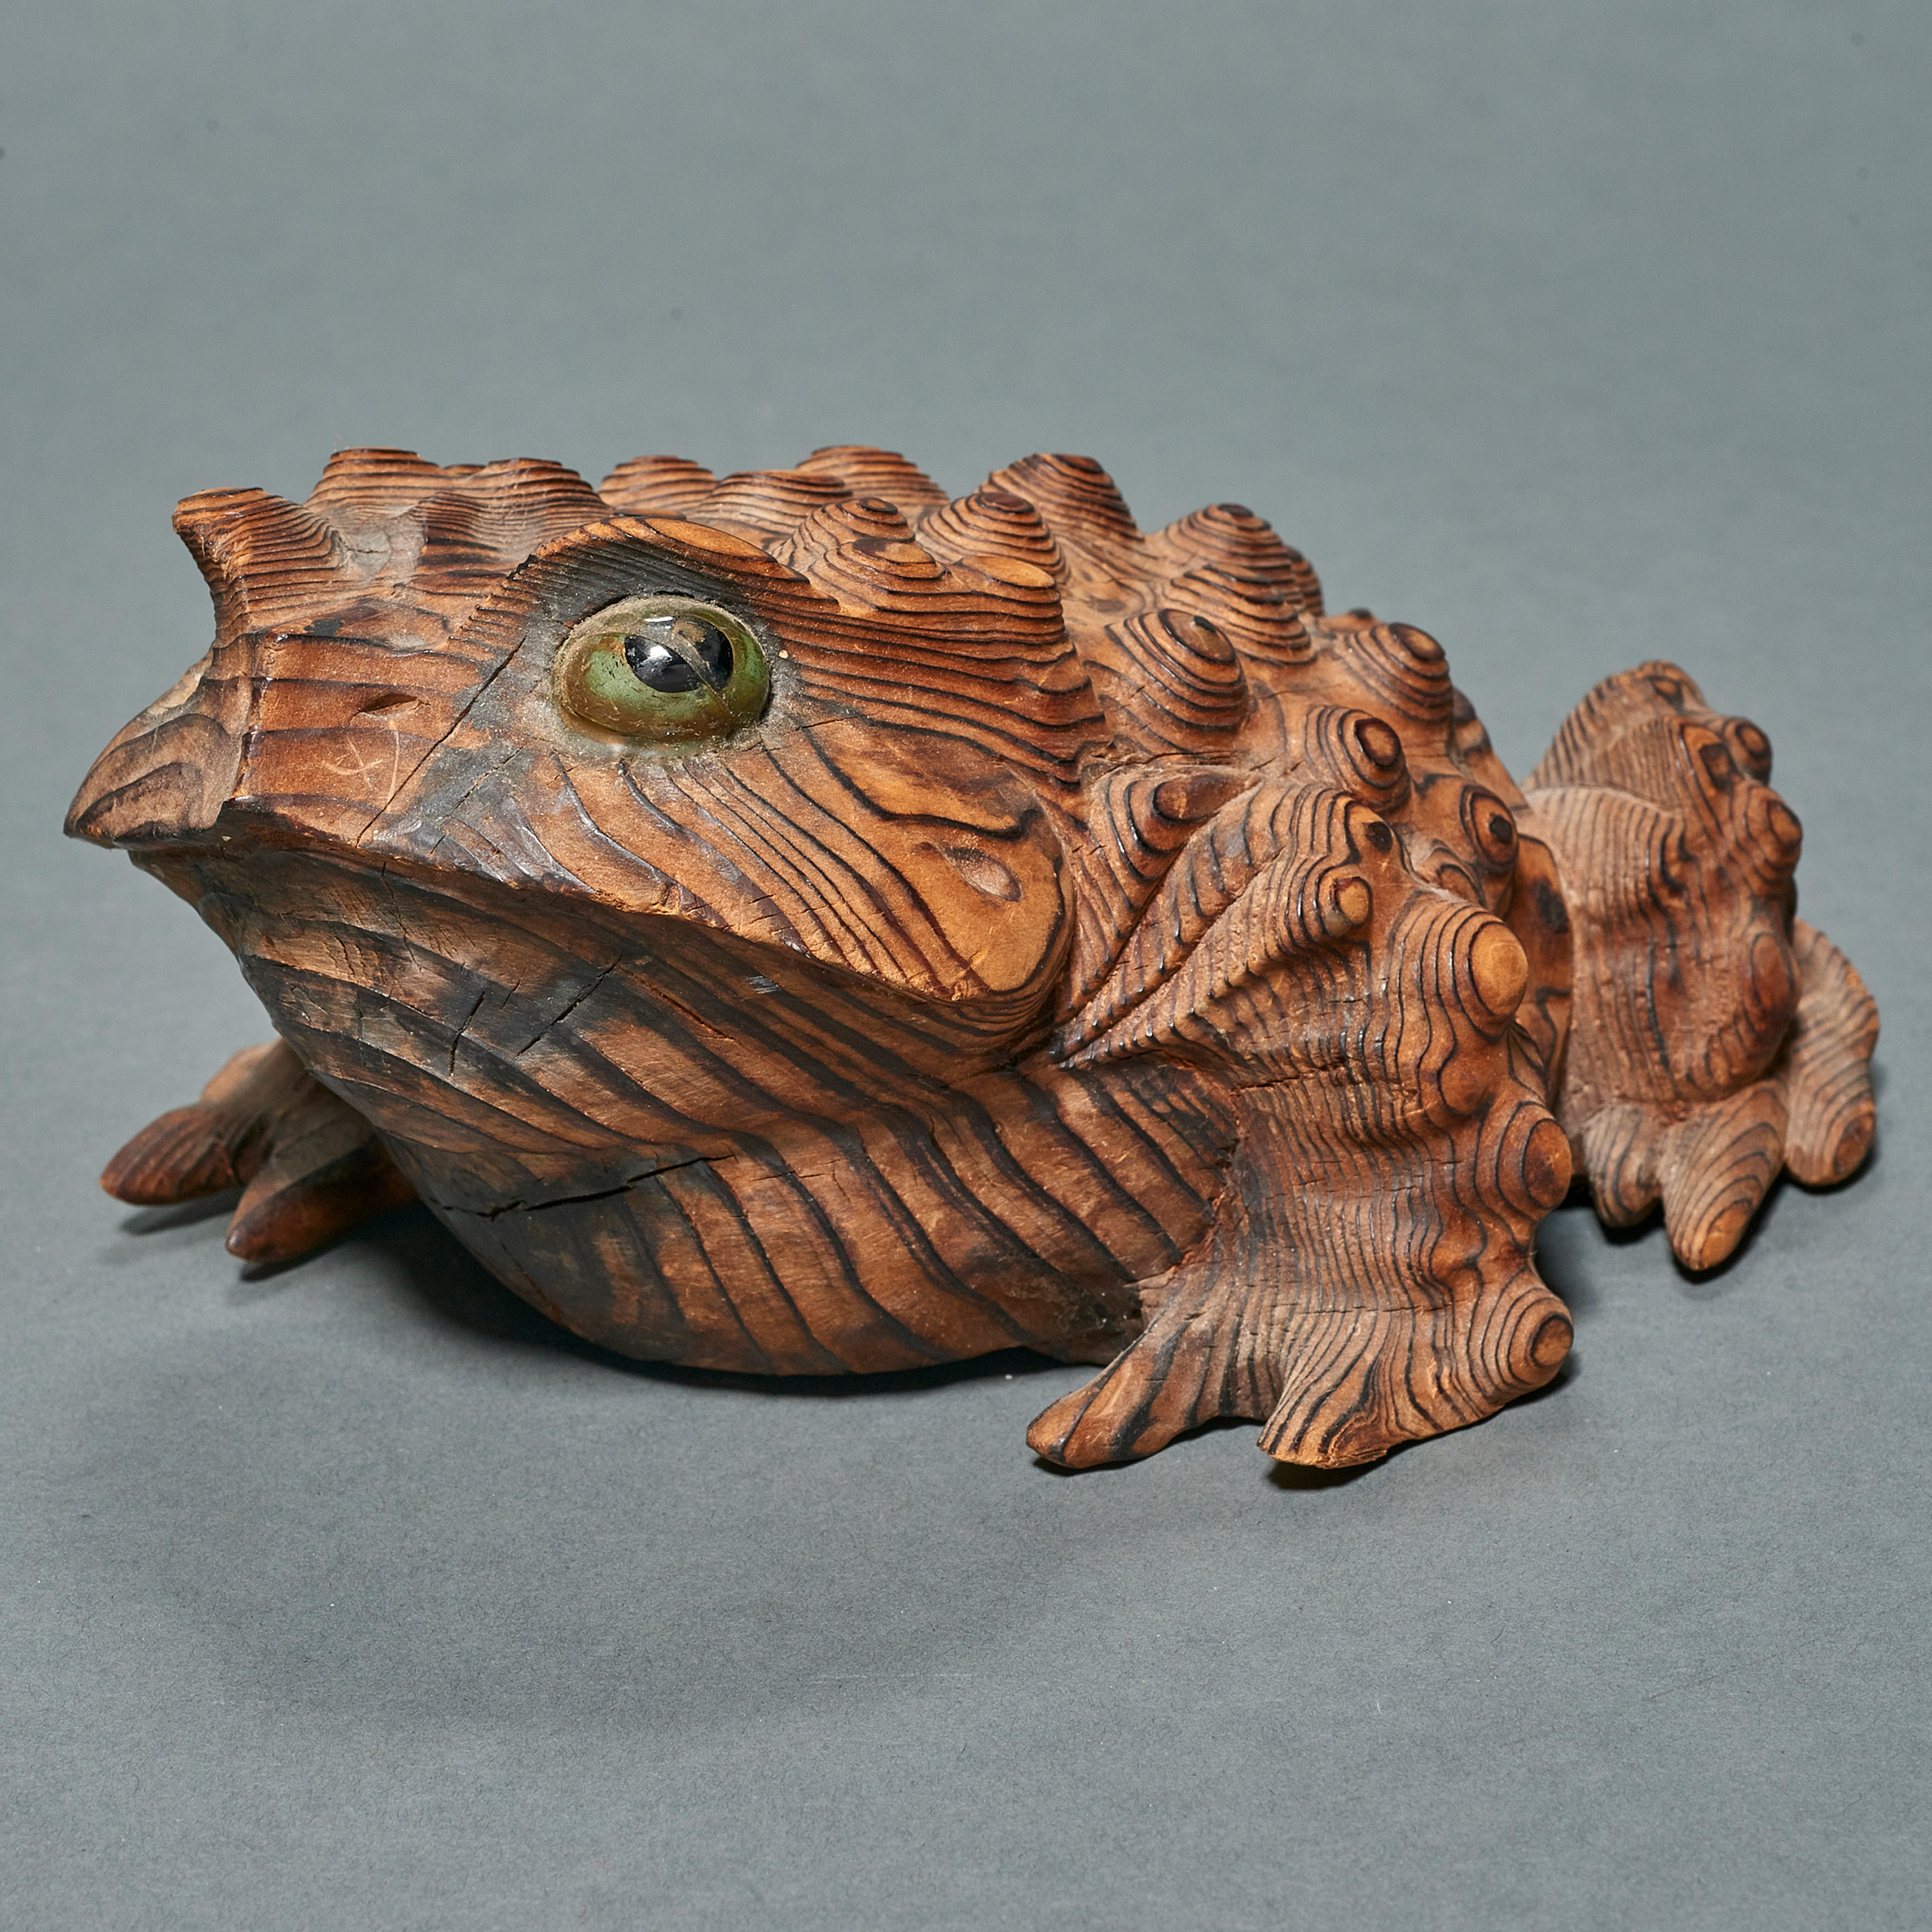 JAPANESE WOOD CARVING OF A TOAD 3a40ba